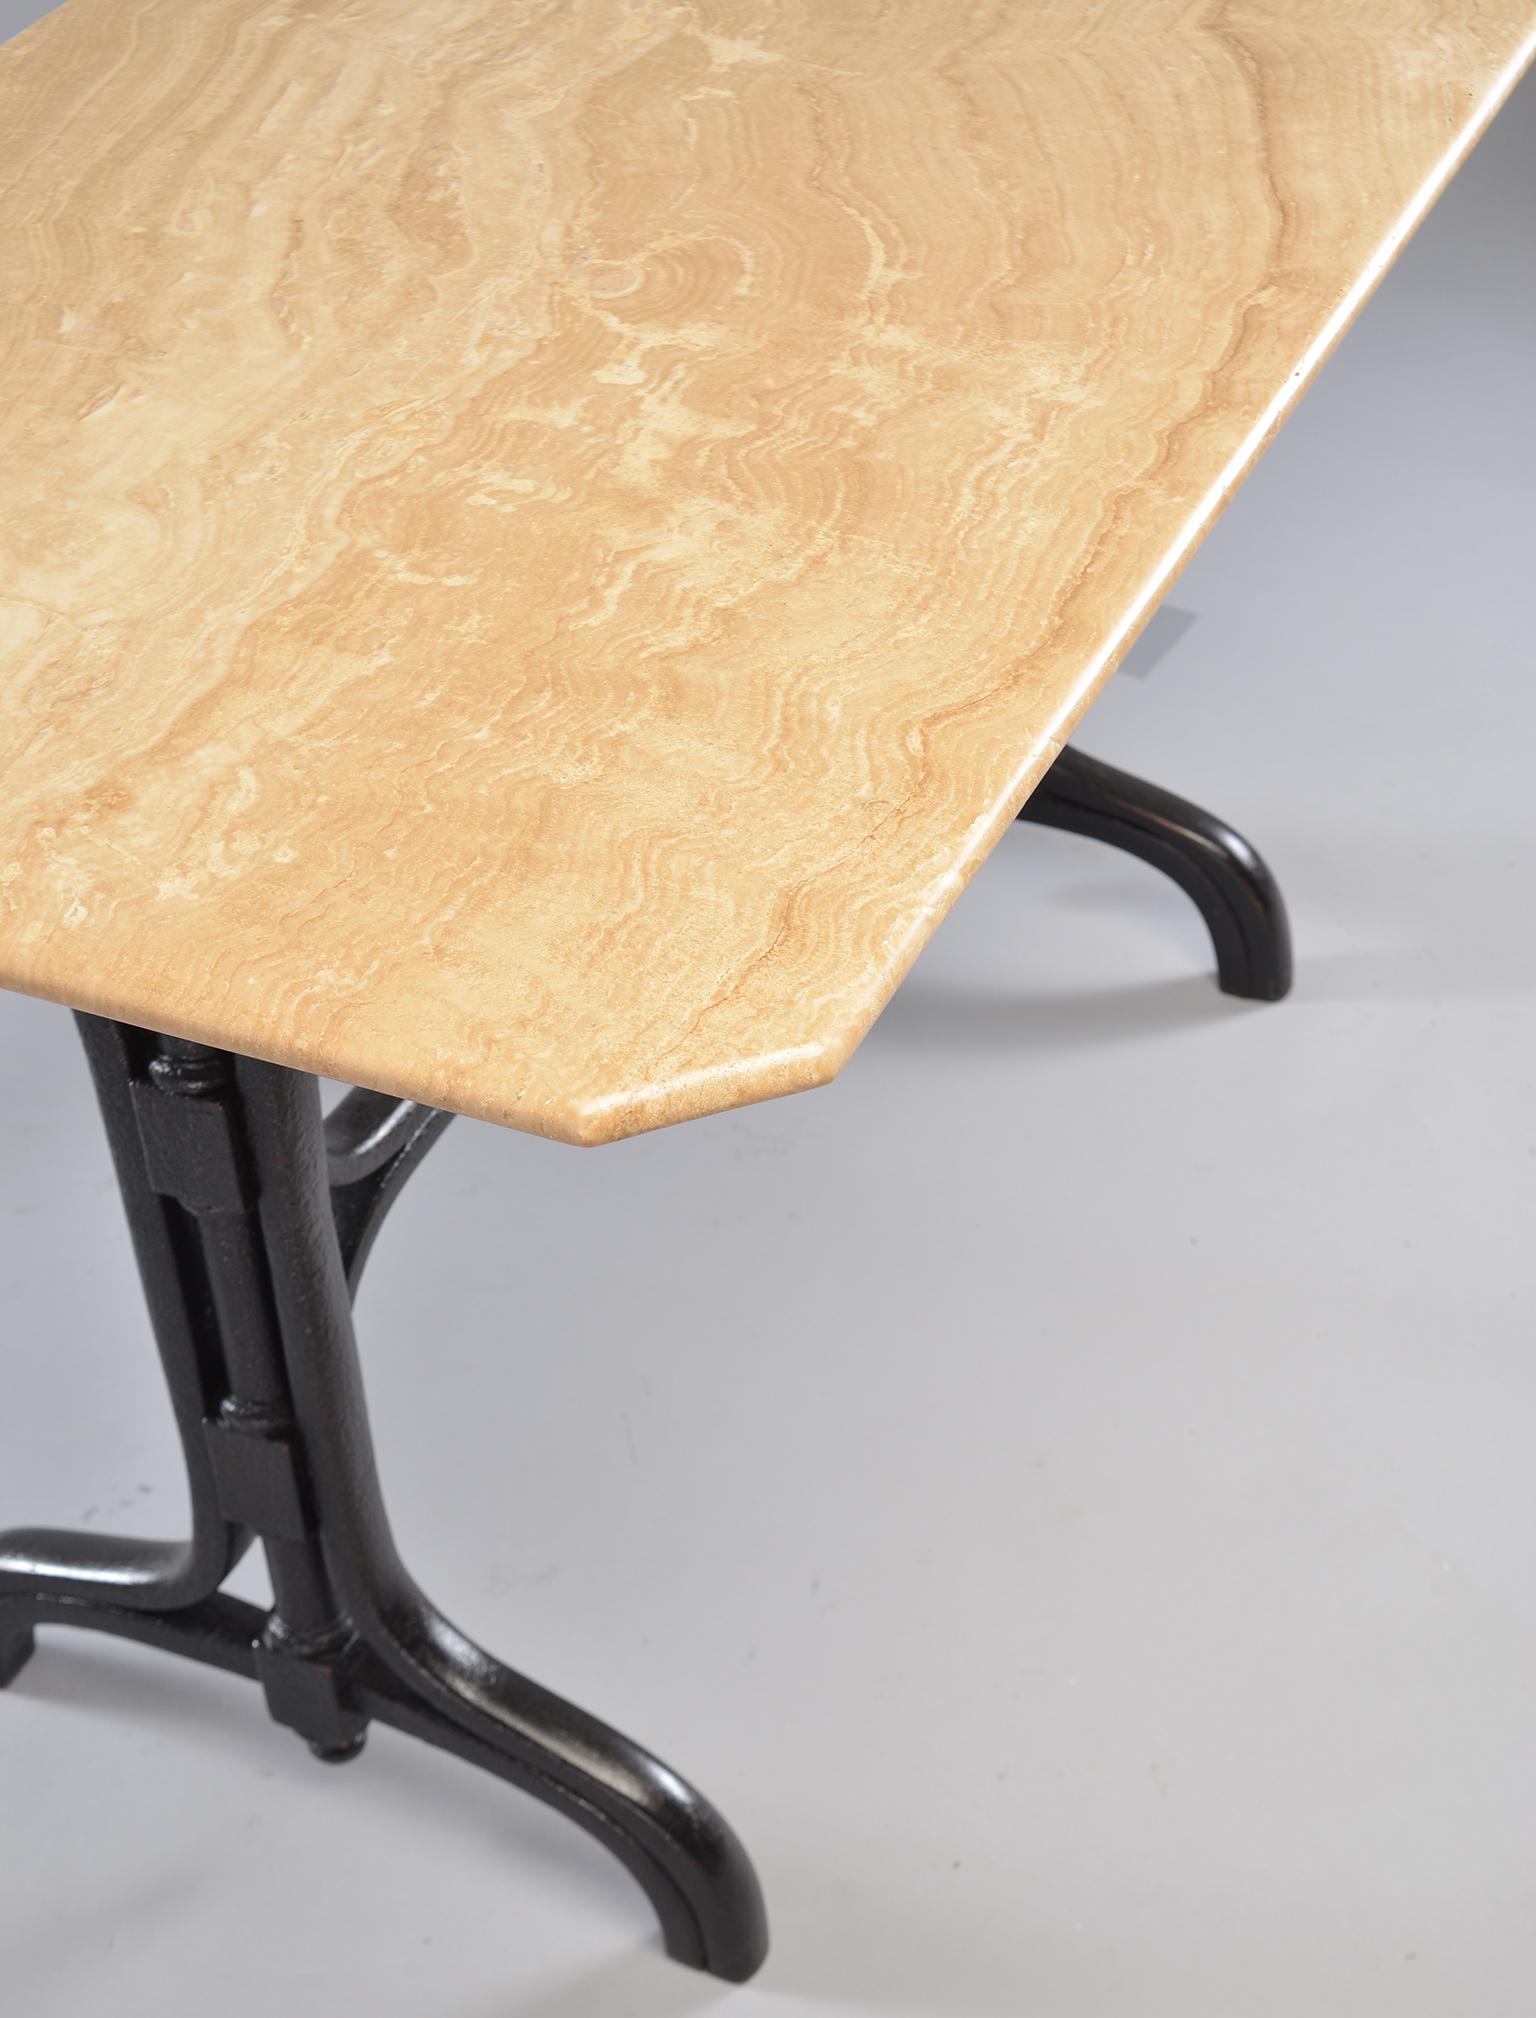 Versatile sized pub table has creamy beige marble top sits on a circa 1930s bentwood base with an ebonised finish.